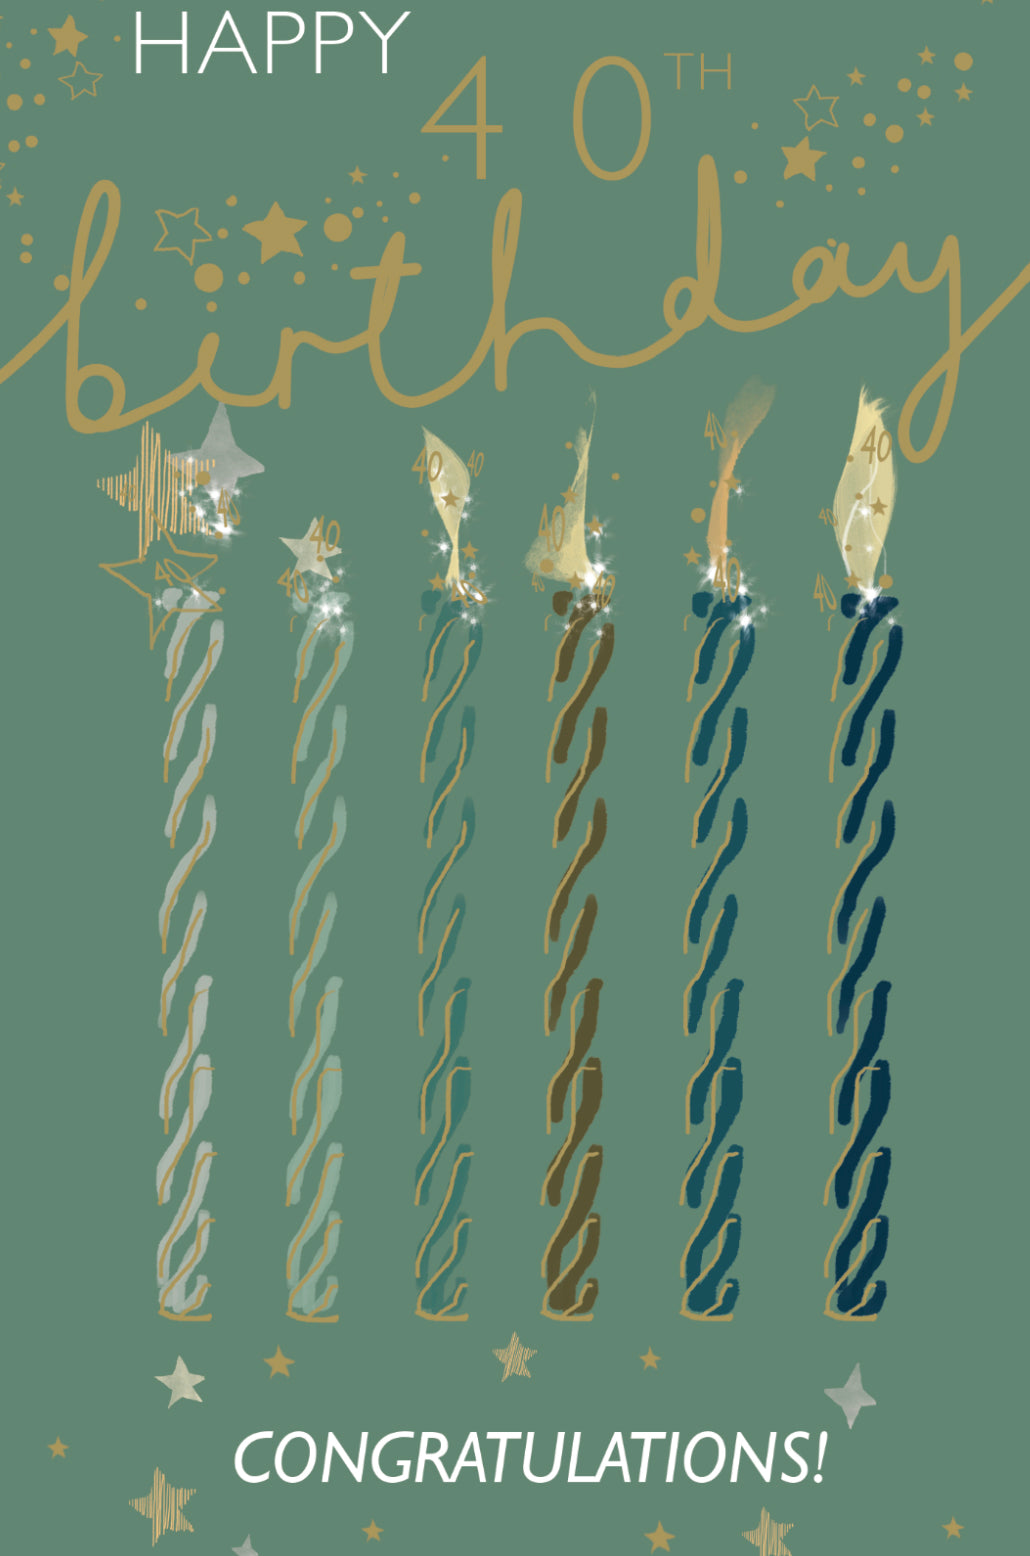 40th birthday card - sparkling candles